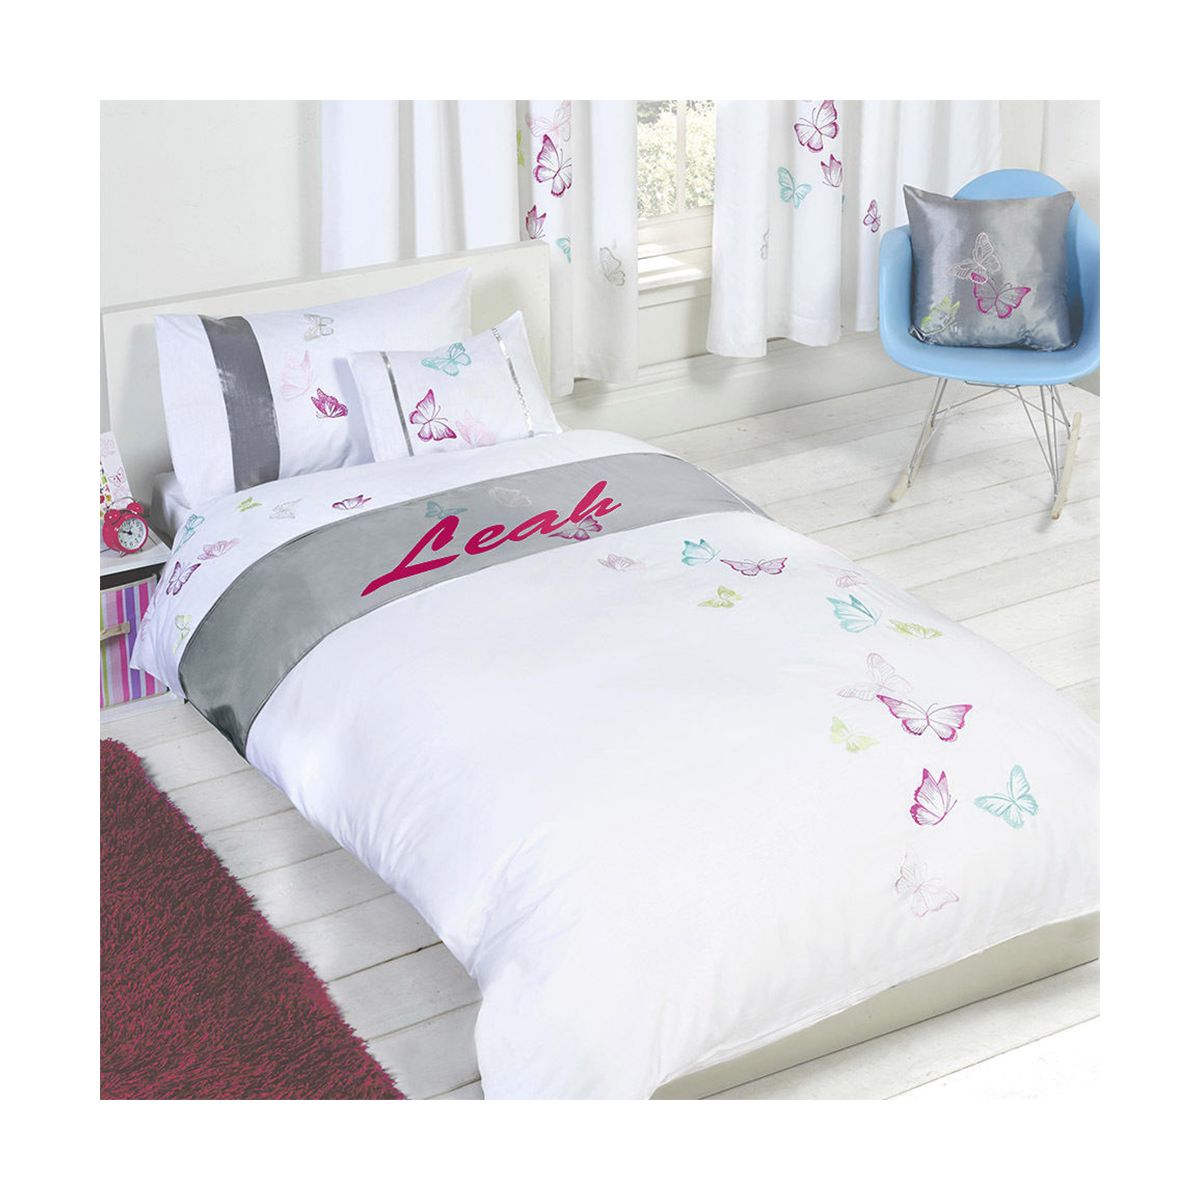 Leah - Personalised Butterfly Duvet Cover Set